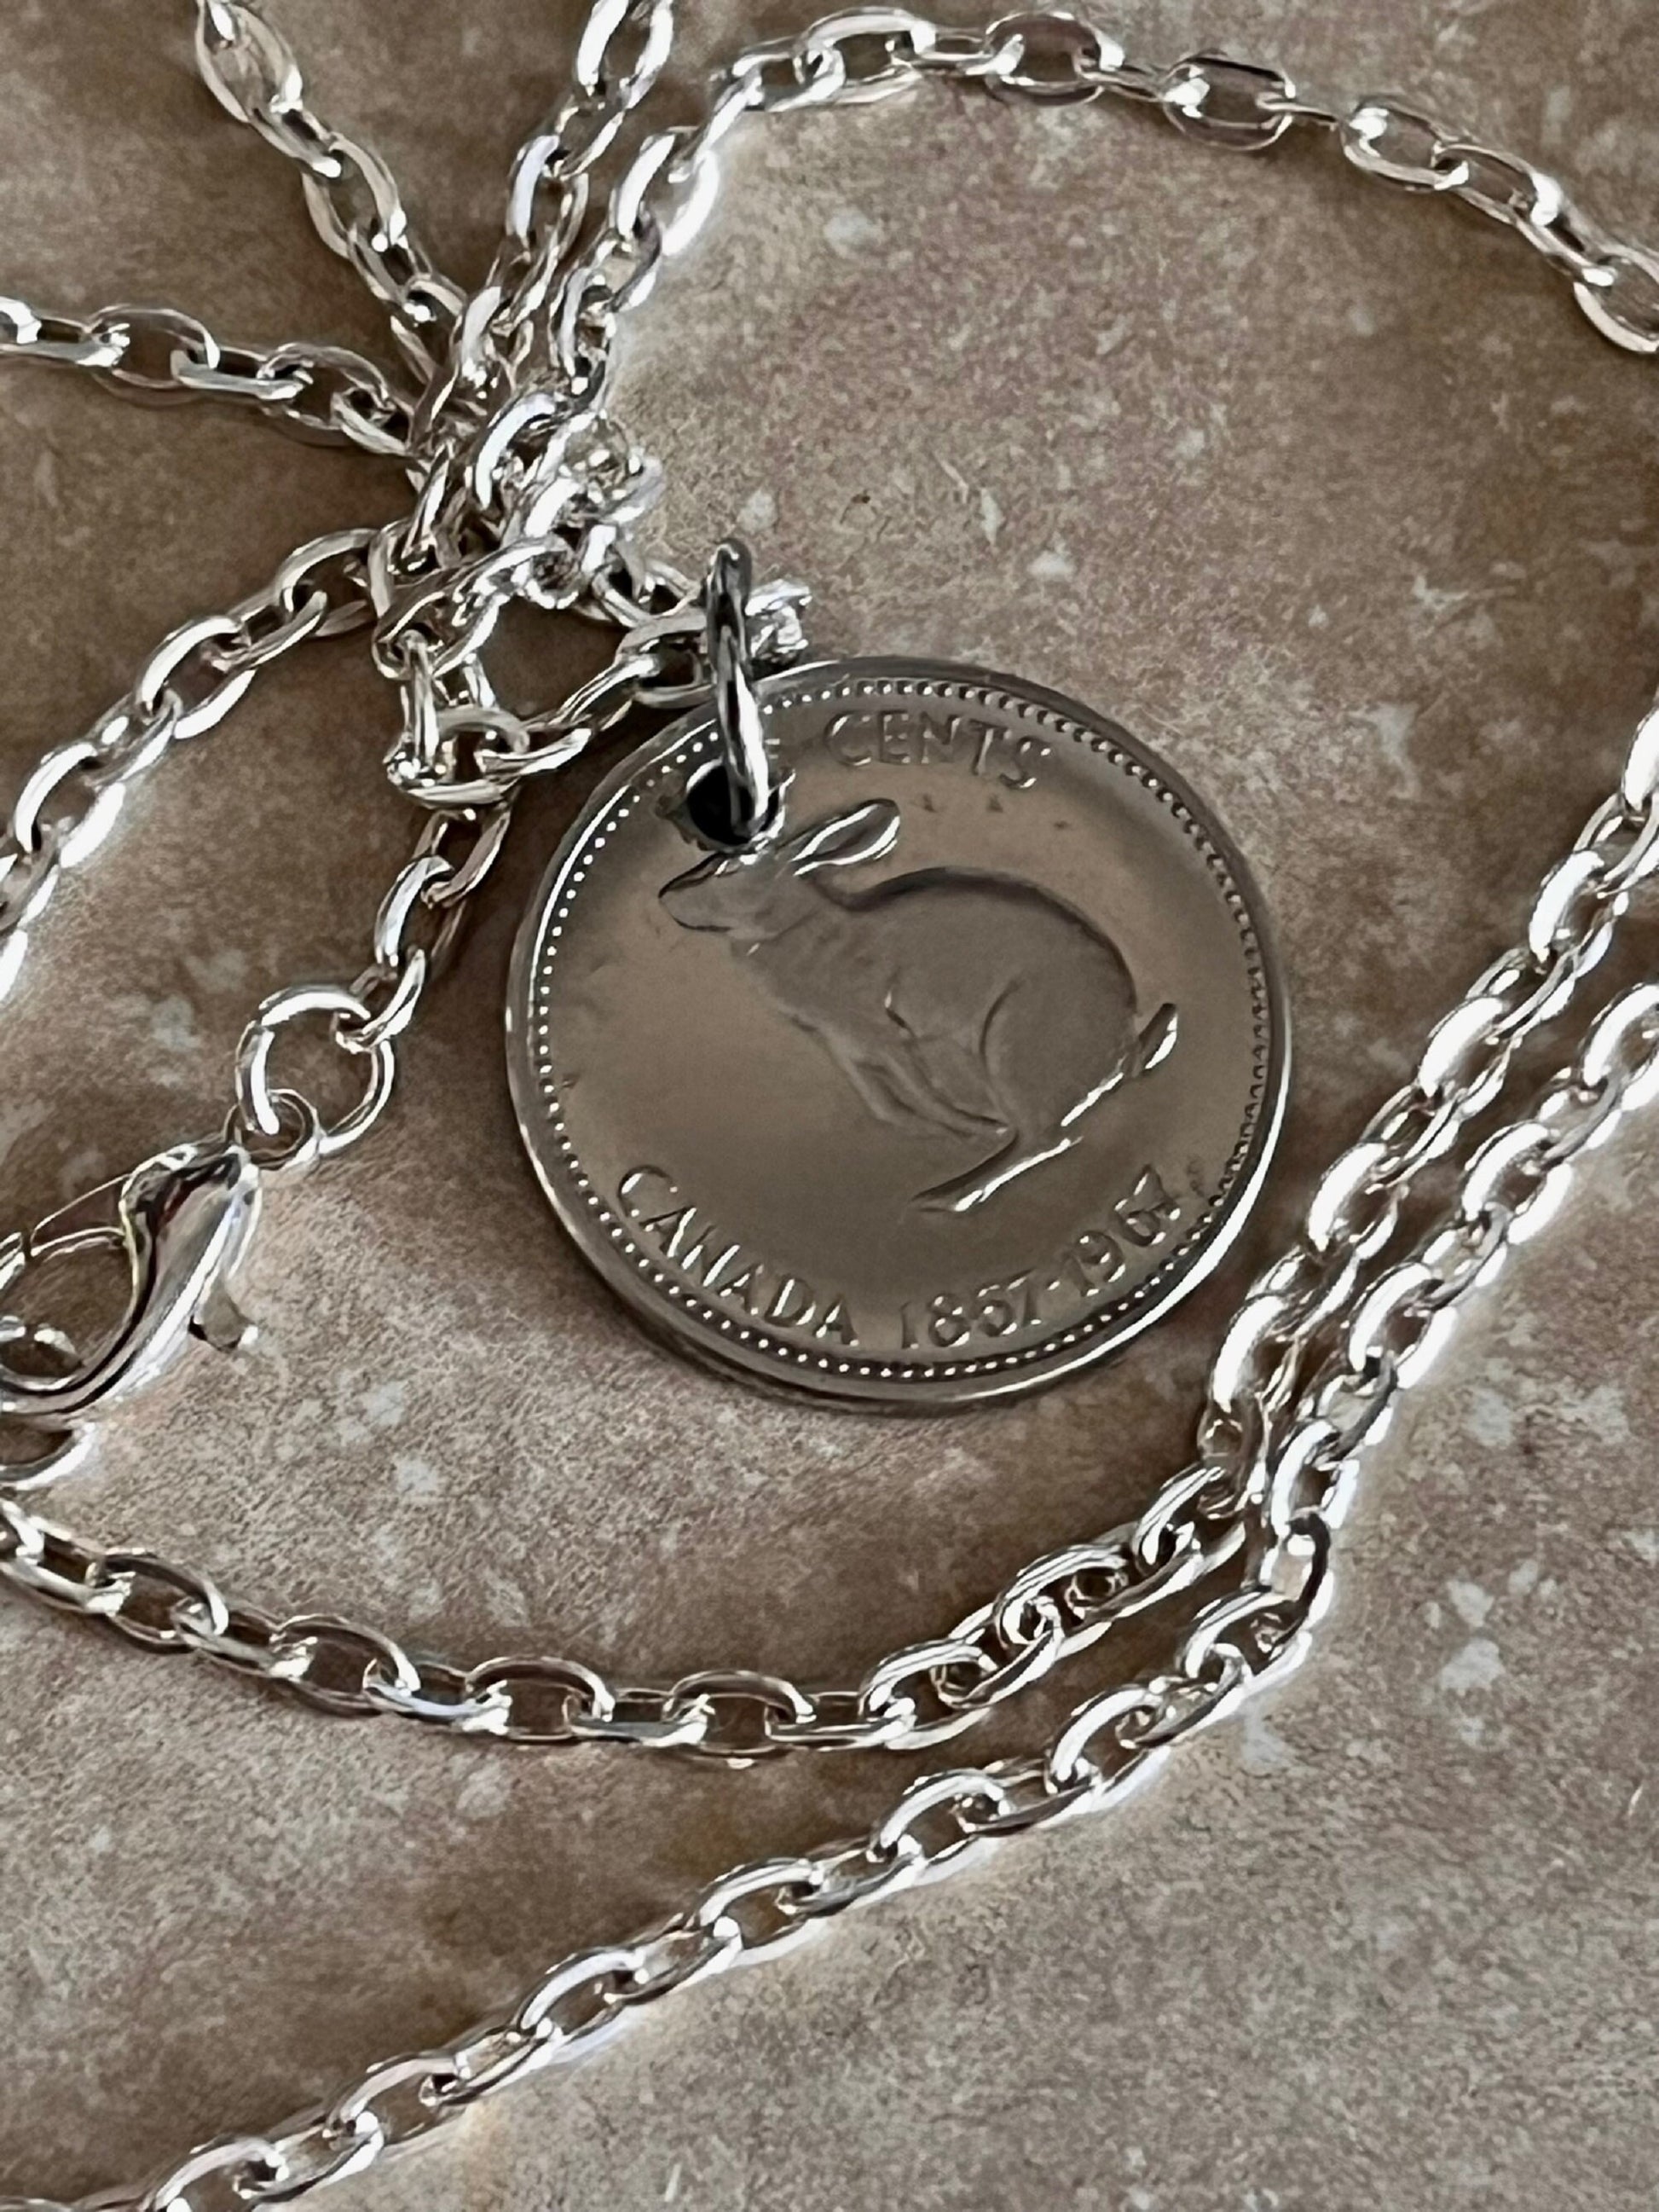 Canada Coin Necklace Rabbit 1967 5 Cents Pendant Centennial Nickel Personal Jewelry Gift Friend Charm For Him Her World Coin Collector